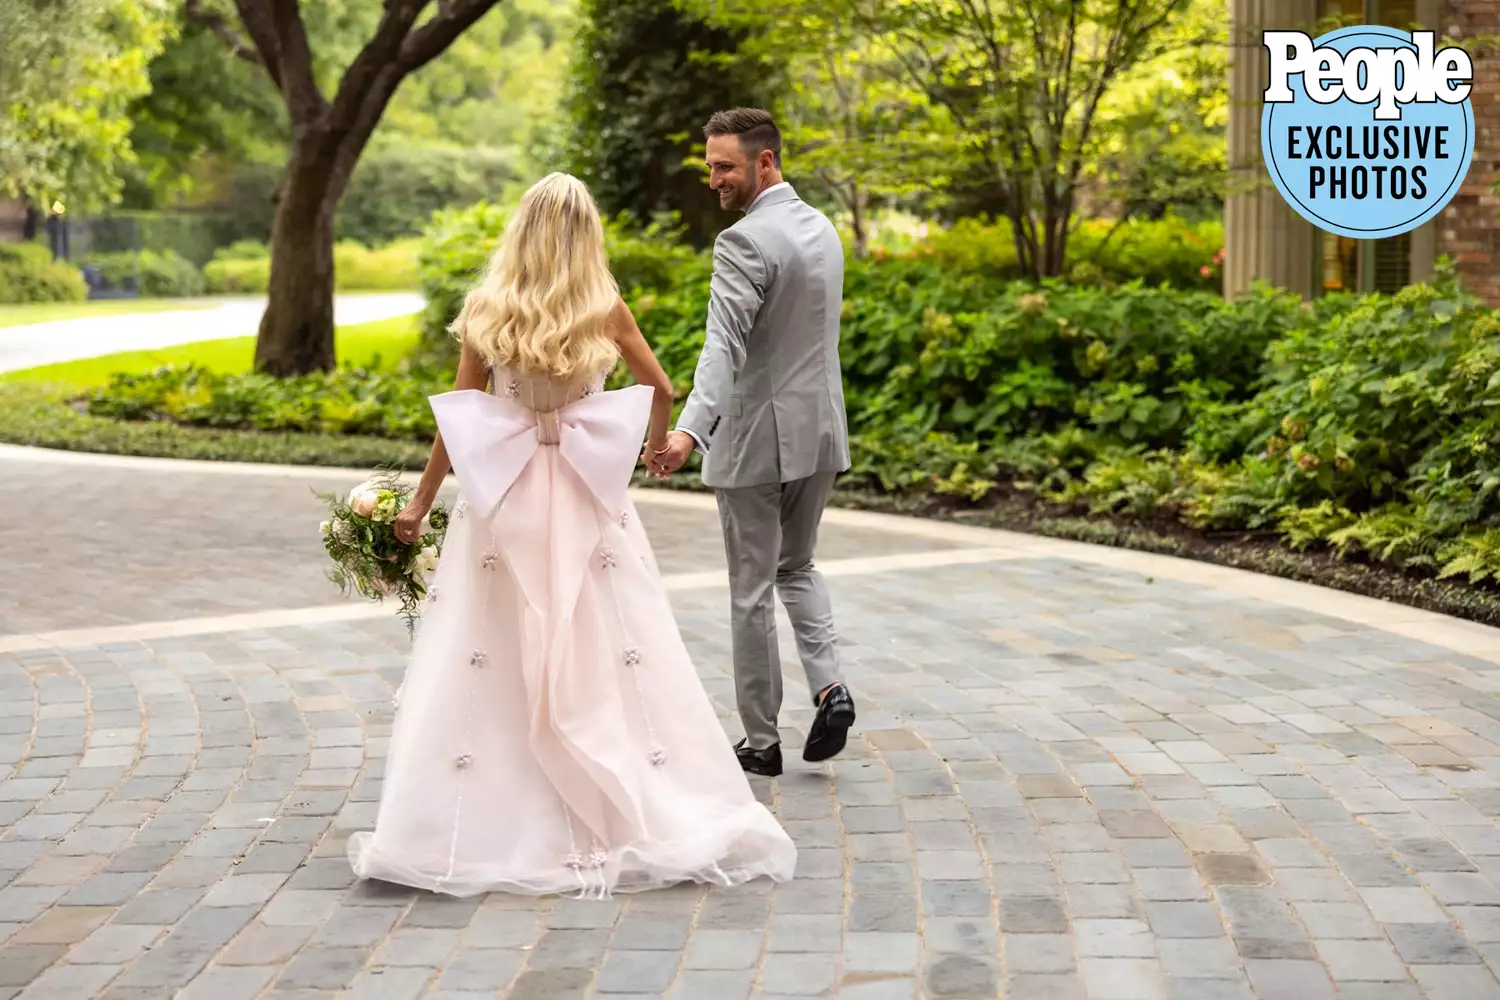 Kristin Chenoweth's wedding dress designer created a gorgeous chanel pink bow on the back, as seen here when she walks with her husband on their wedding day.